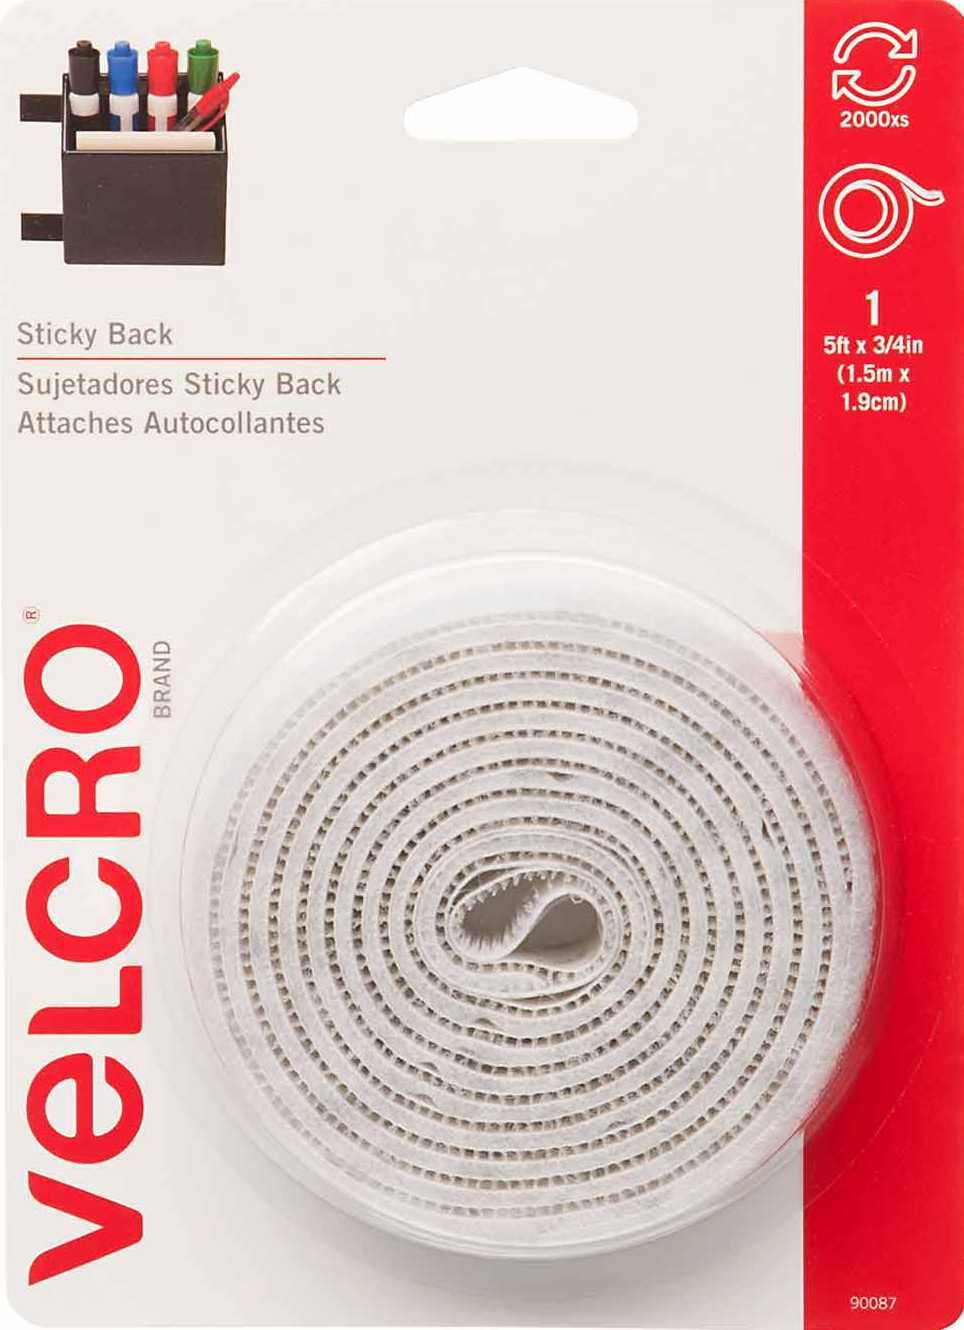 VELCRO Brand - Sticky Back Hook and Loop Fasteners| Perfect for Home or  Office | 18in x 3/4in Tape | White